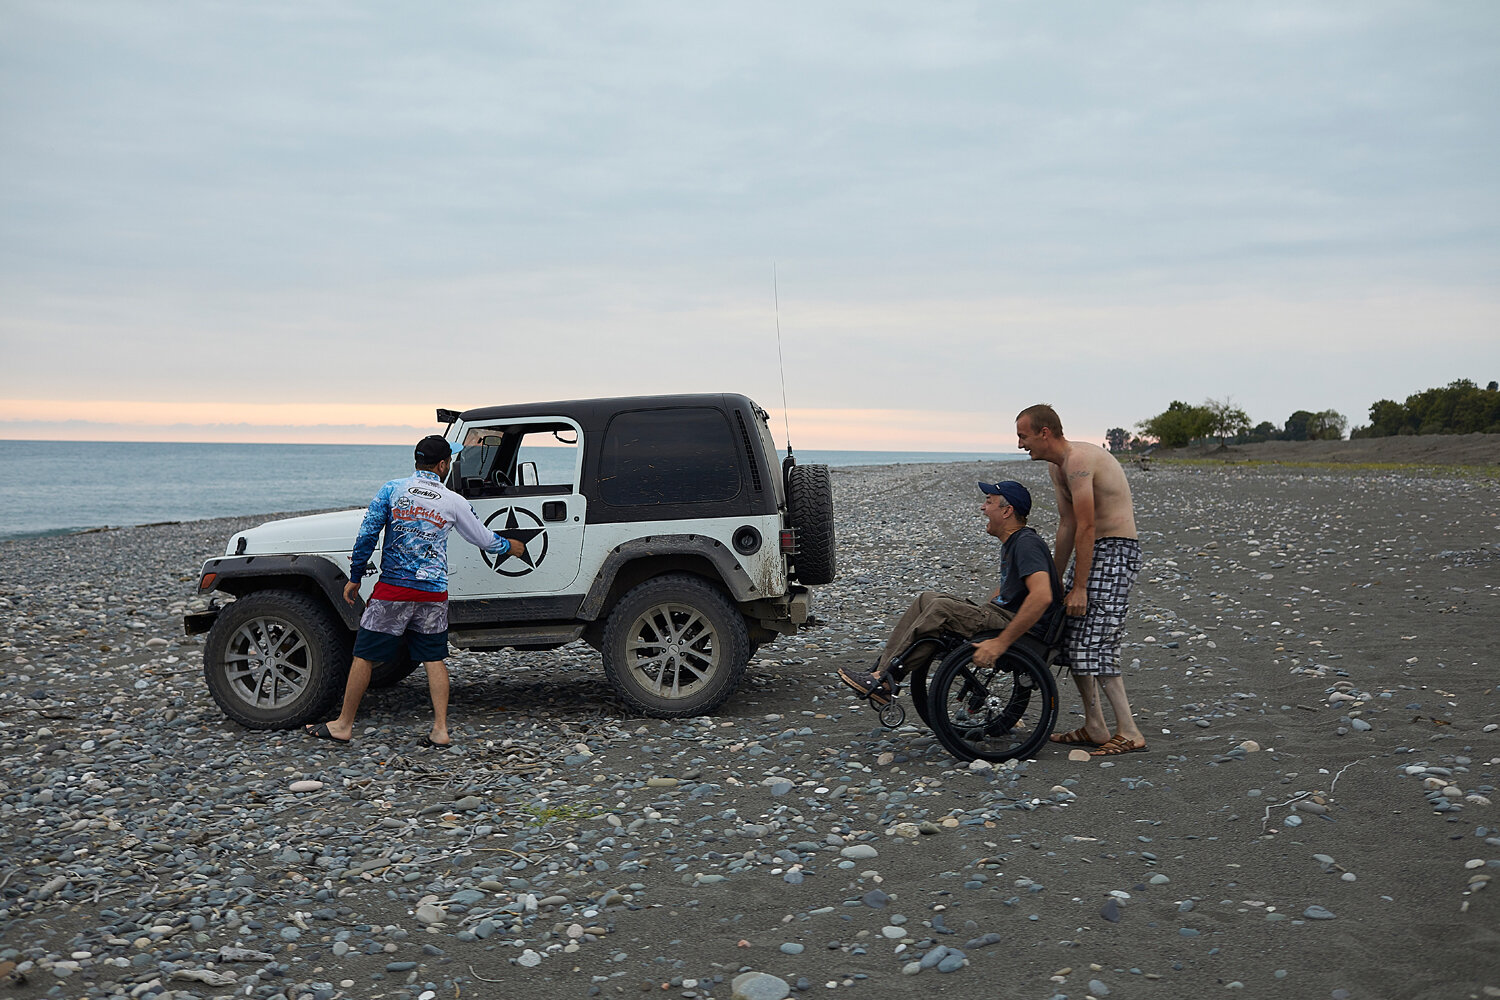  Abkhazia, Adzyubzha, 20/07/2019. The fishing for wheelchair users organized by locals on the “Skurcha” base.  